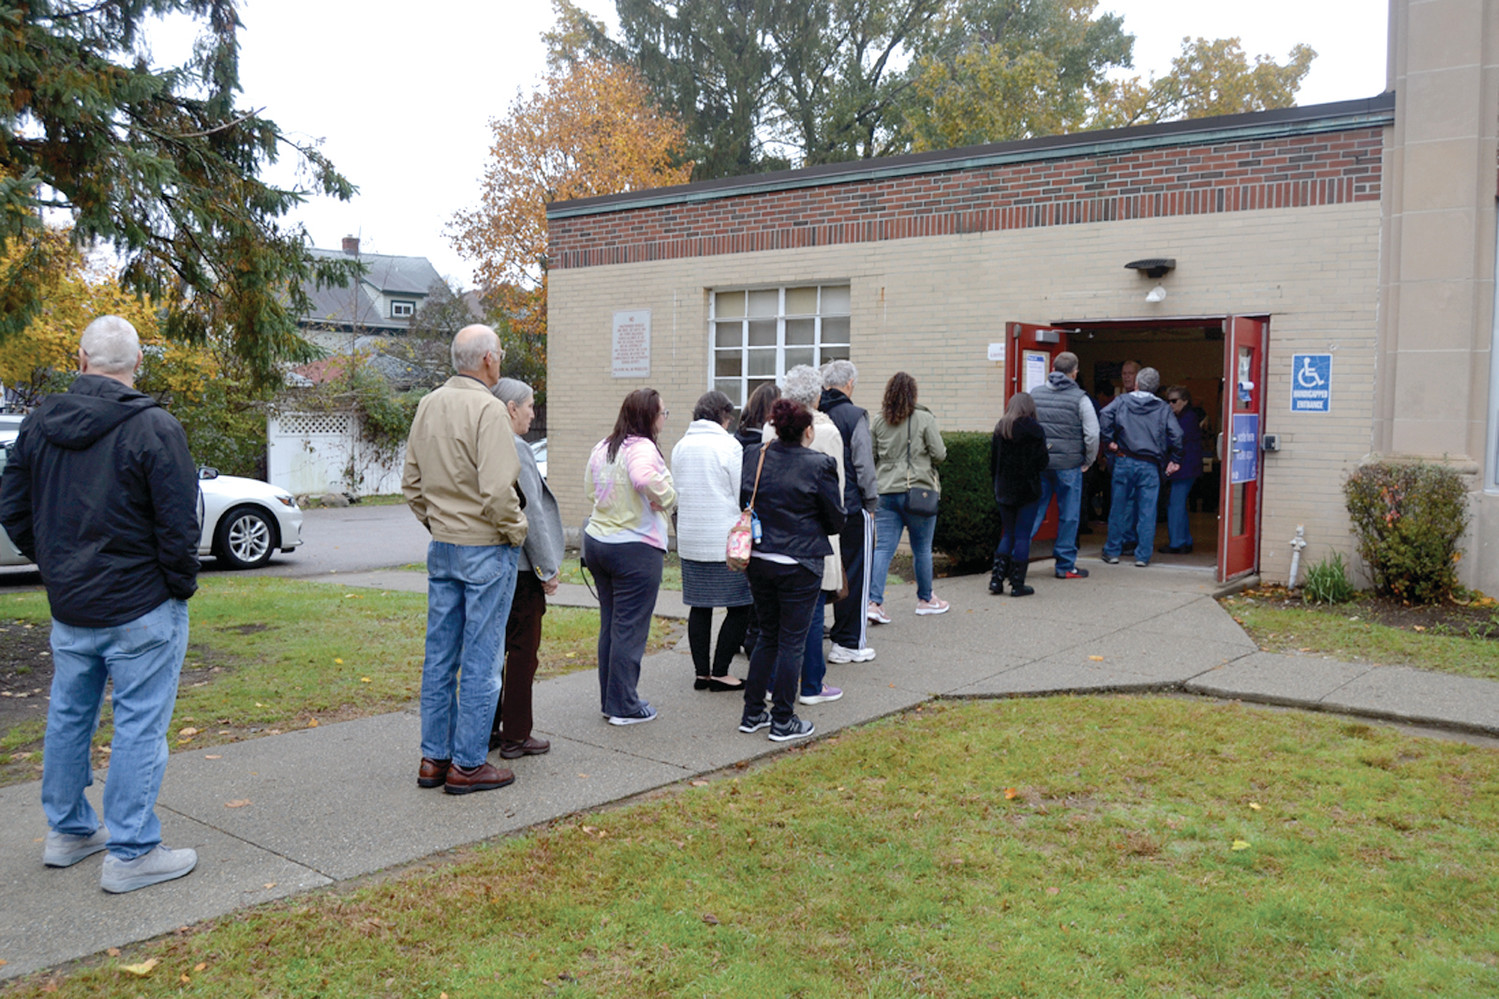 LONG LINE: Turnout was high at the Graniteville School, where voters saw long lines throughout the morning.